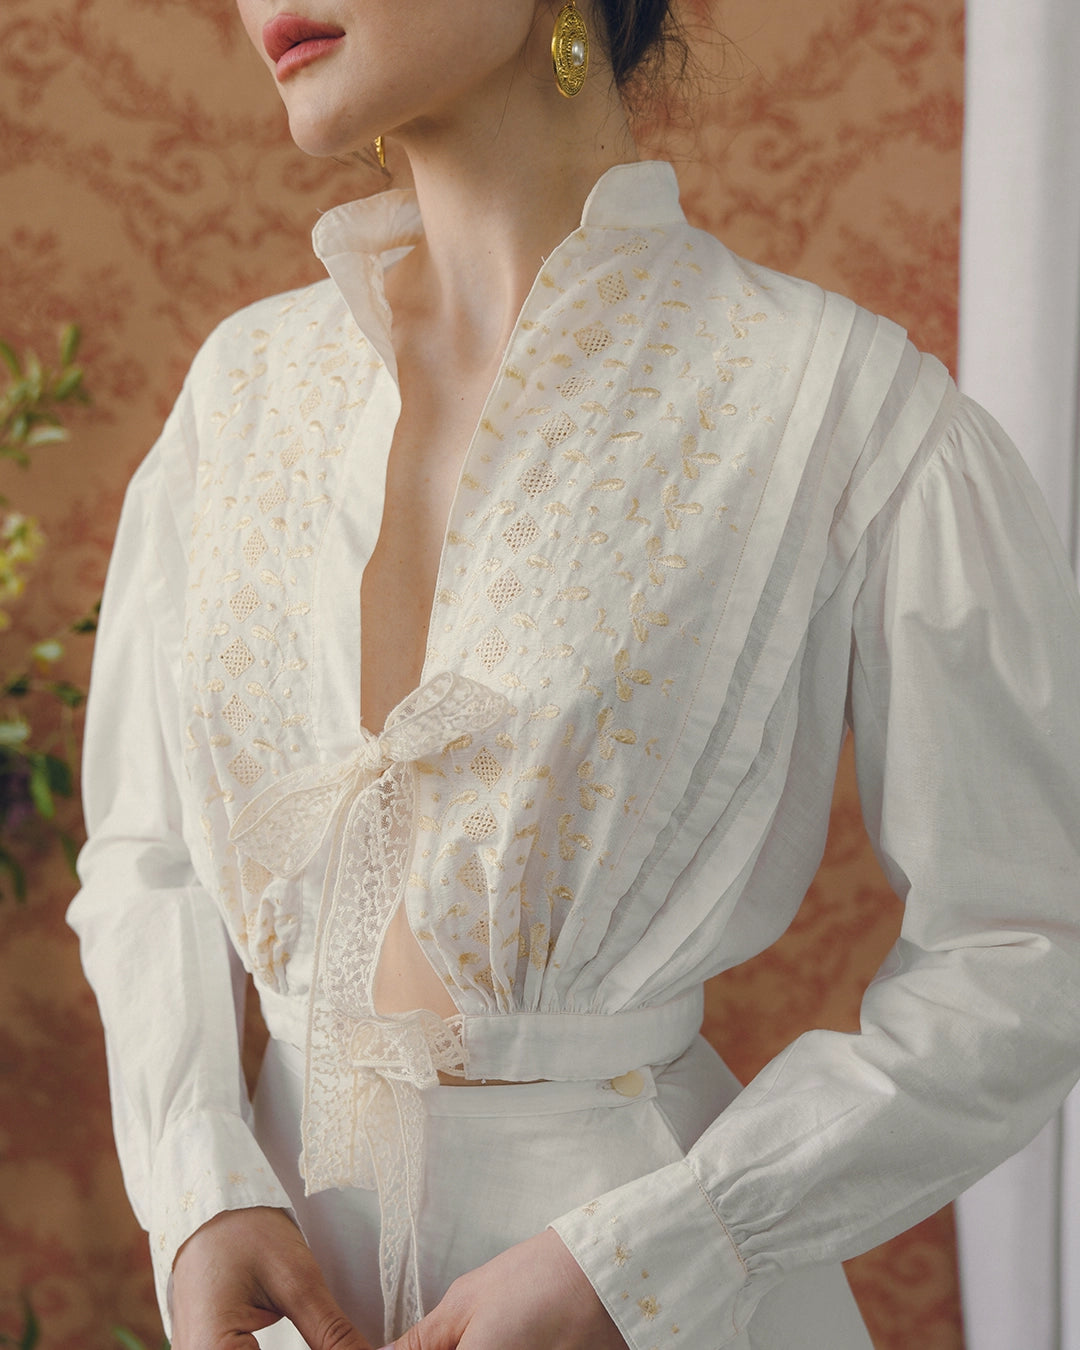 ANTIQUE EDWARDIAN RIBBON-TIE BLOUSE WITH HAND-EMBROIDERY, circa 1900